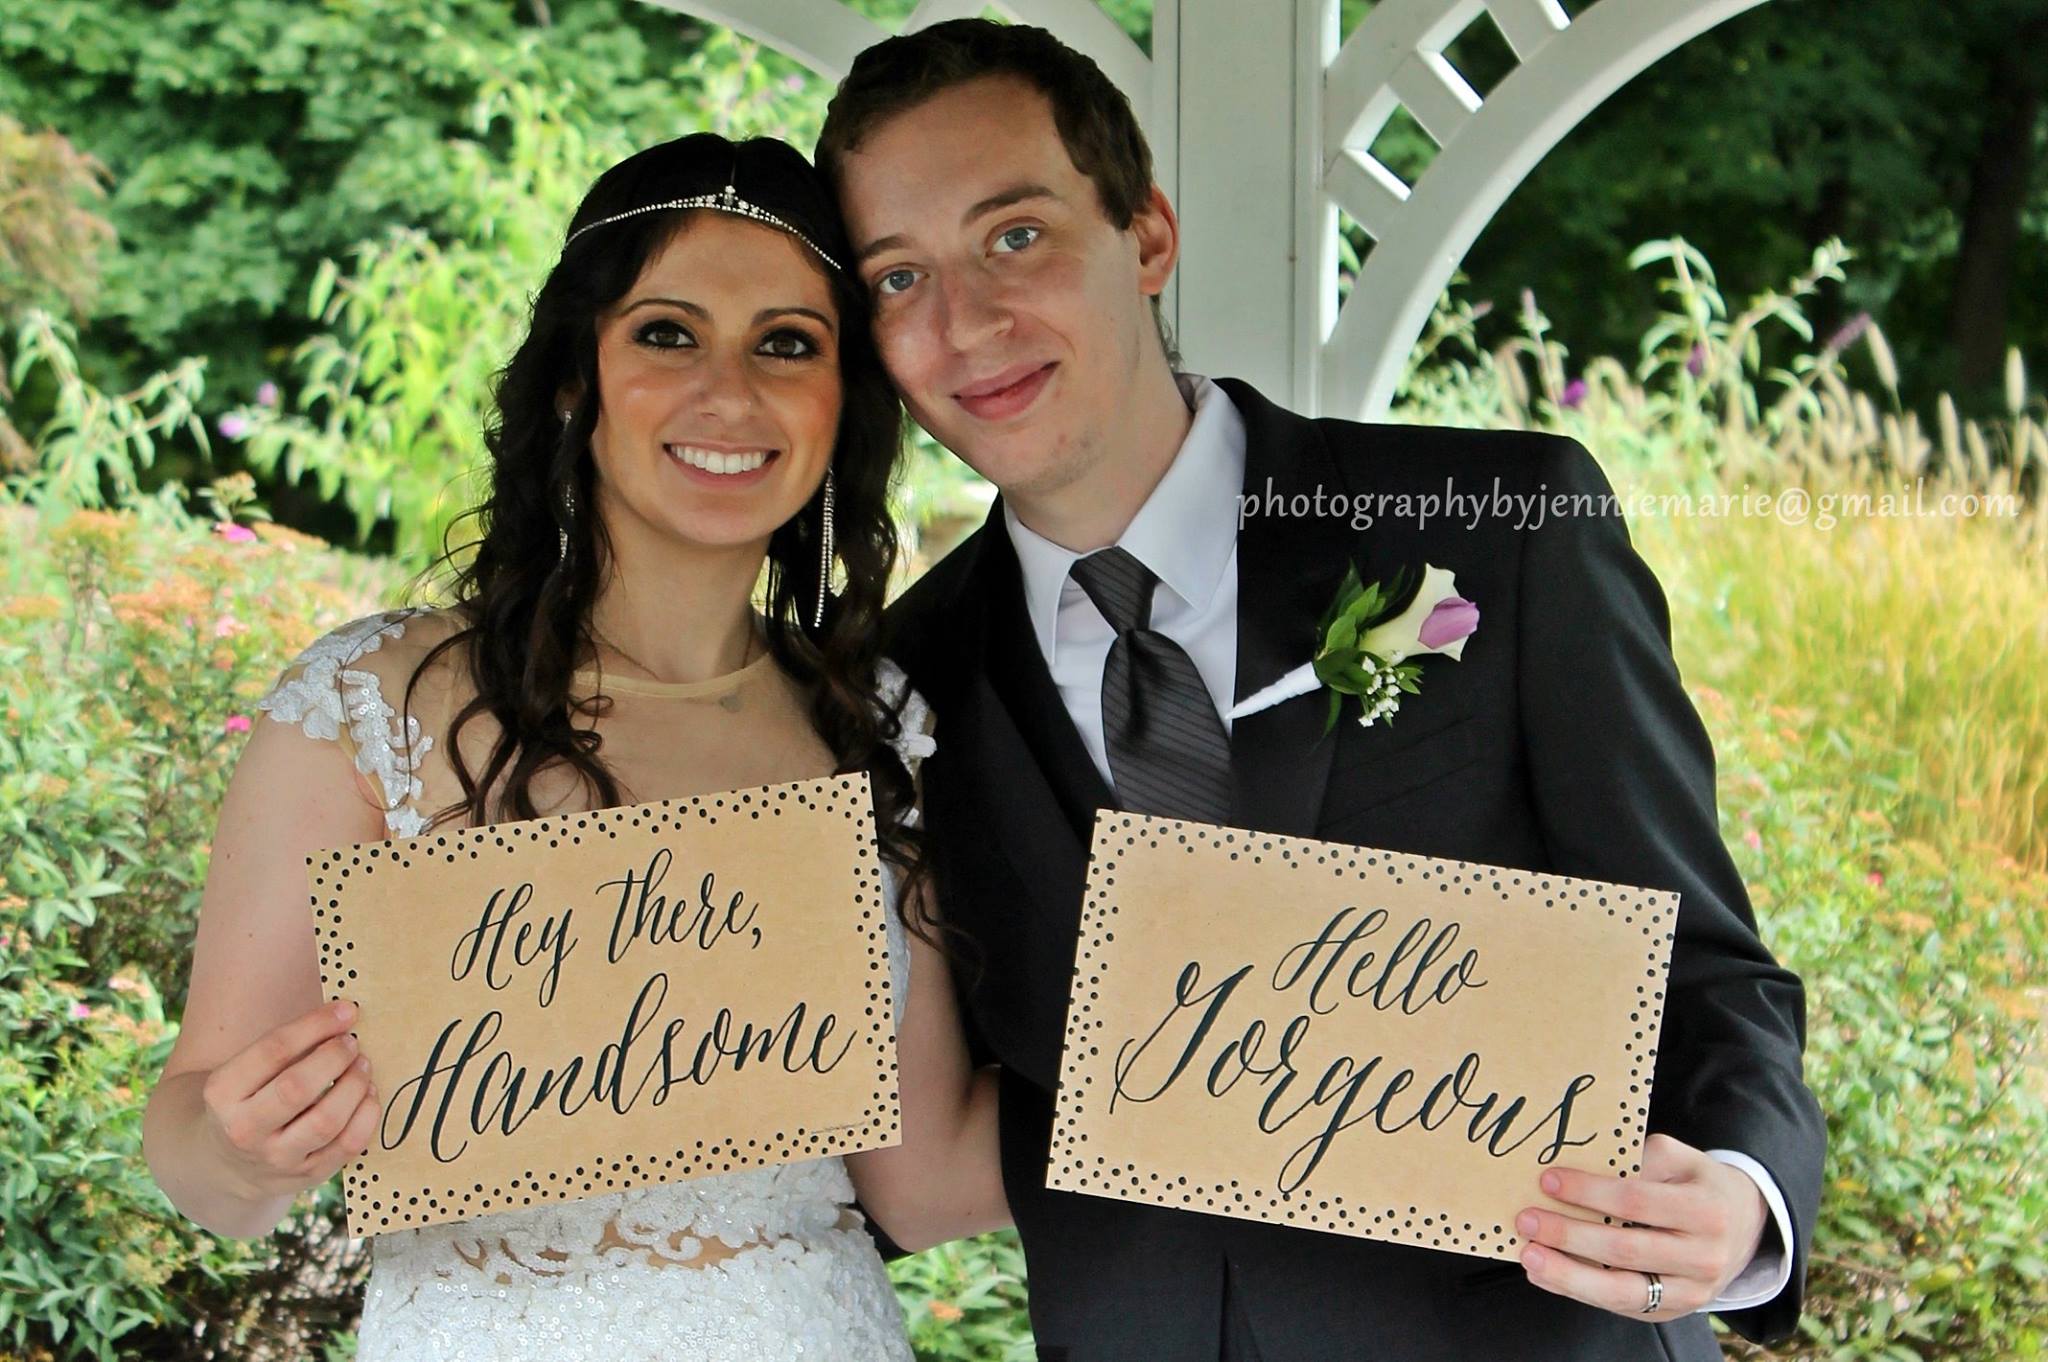 couple in gazebo holding signs hey there handsome and hello georgeous